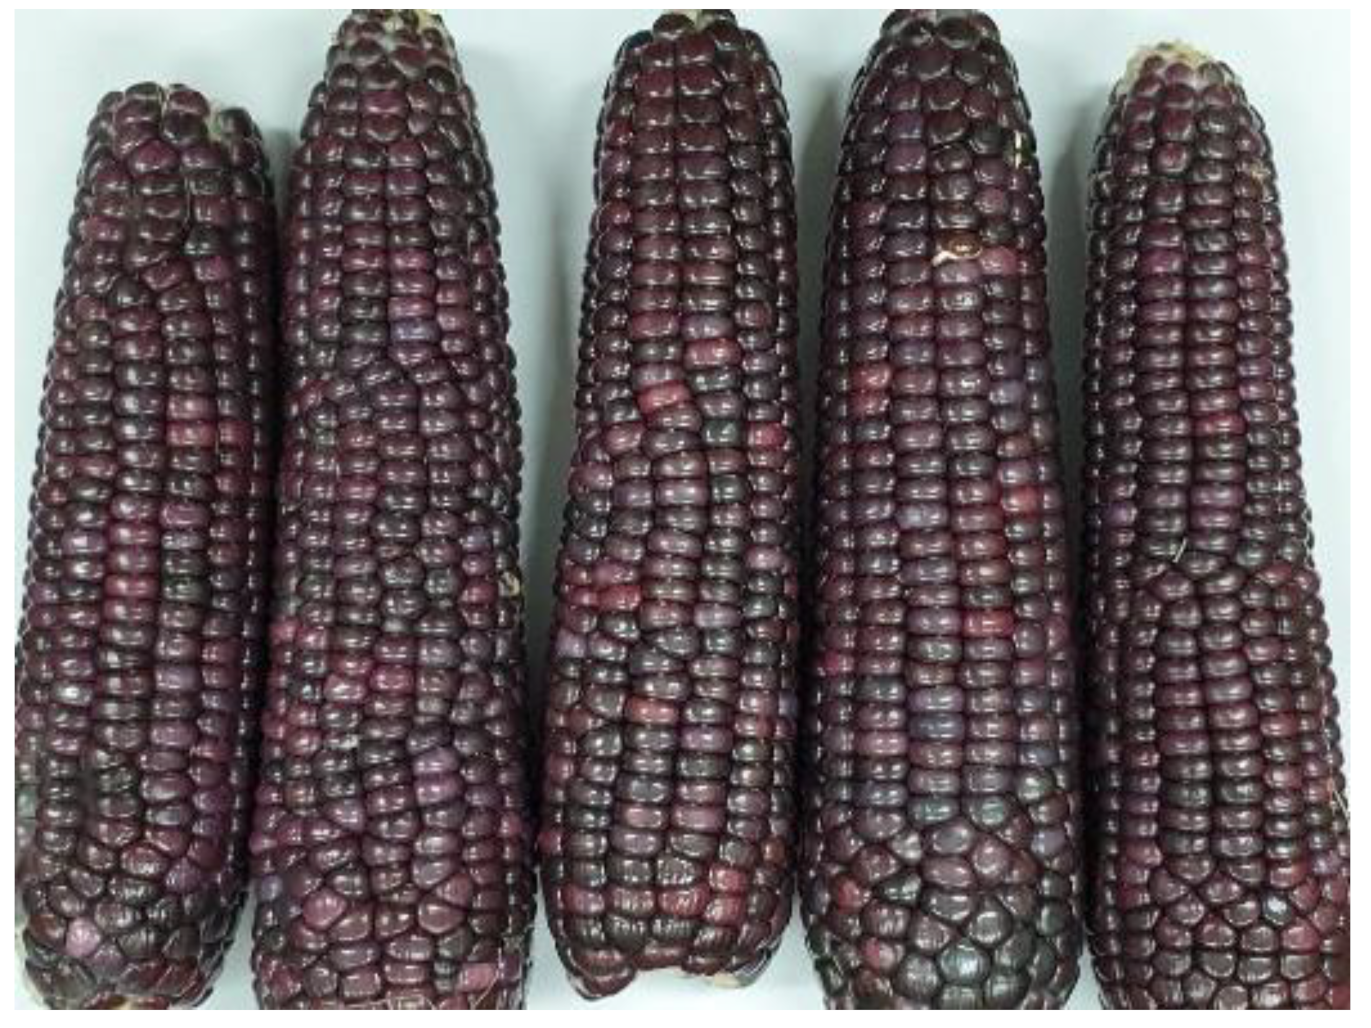 Sci. Pharm. | Free Full-Text | A Review of the Biological Properties of  Purple Corn (Zea mays L.)